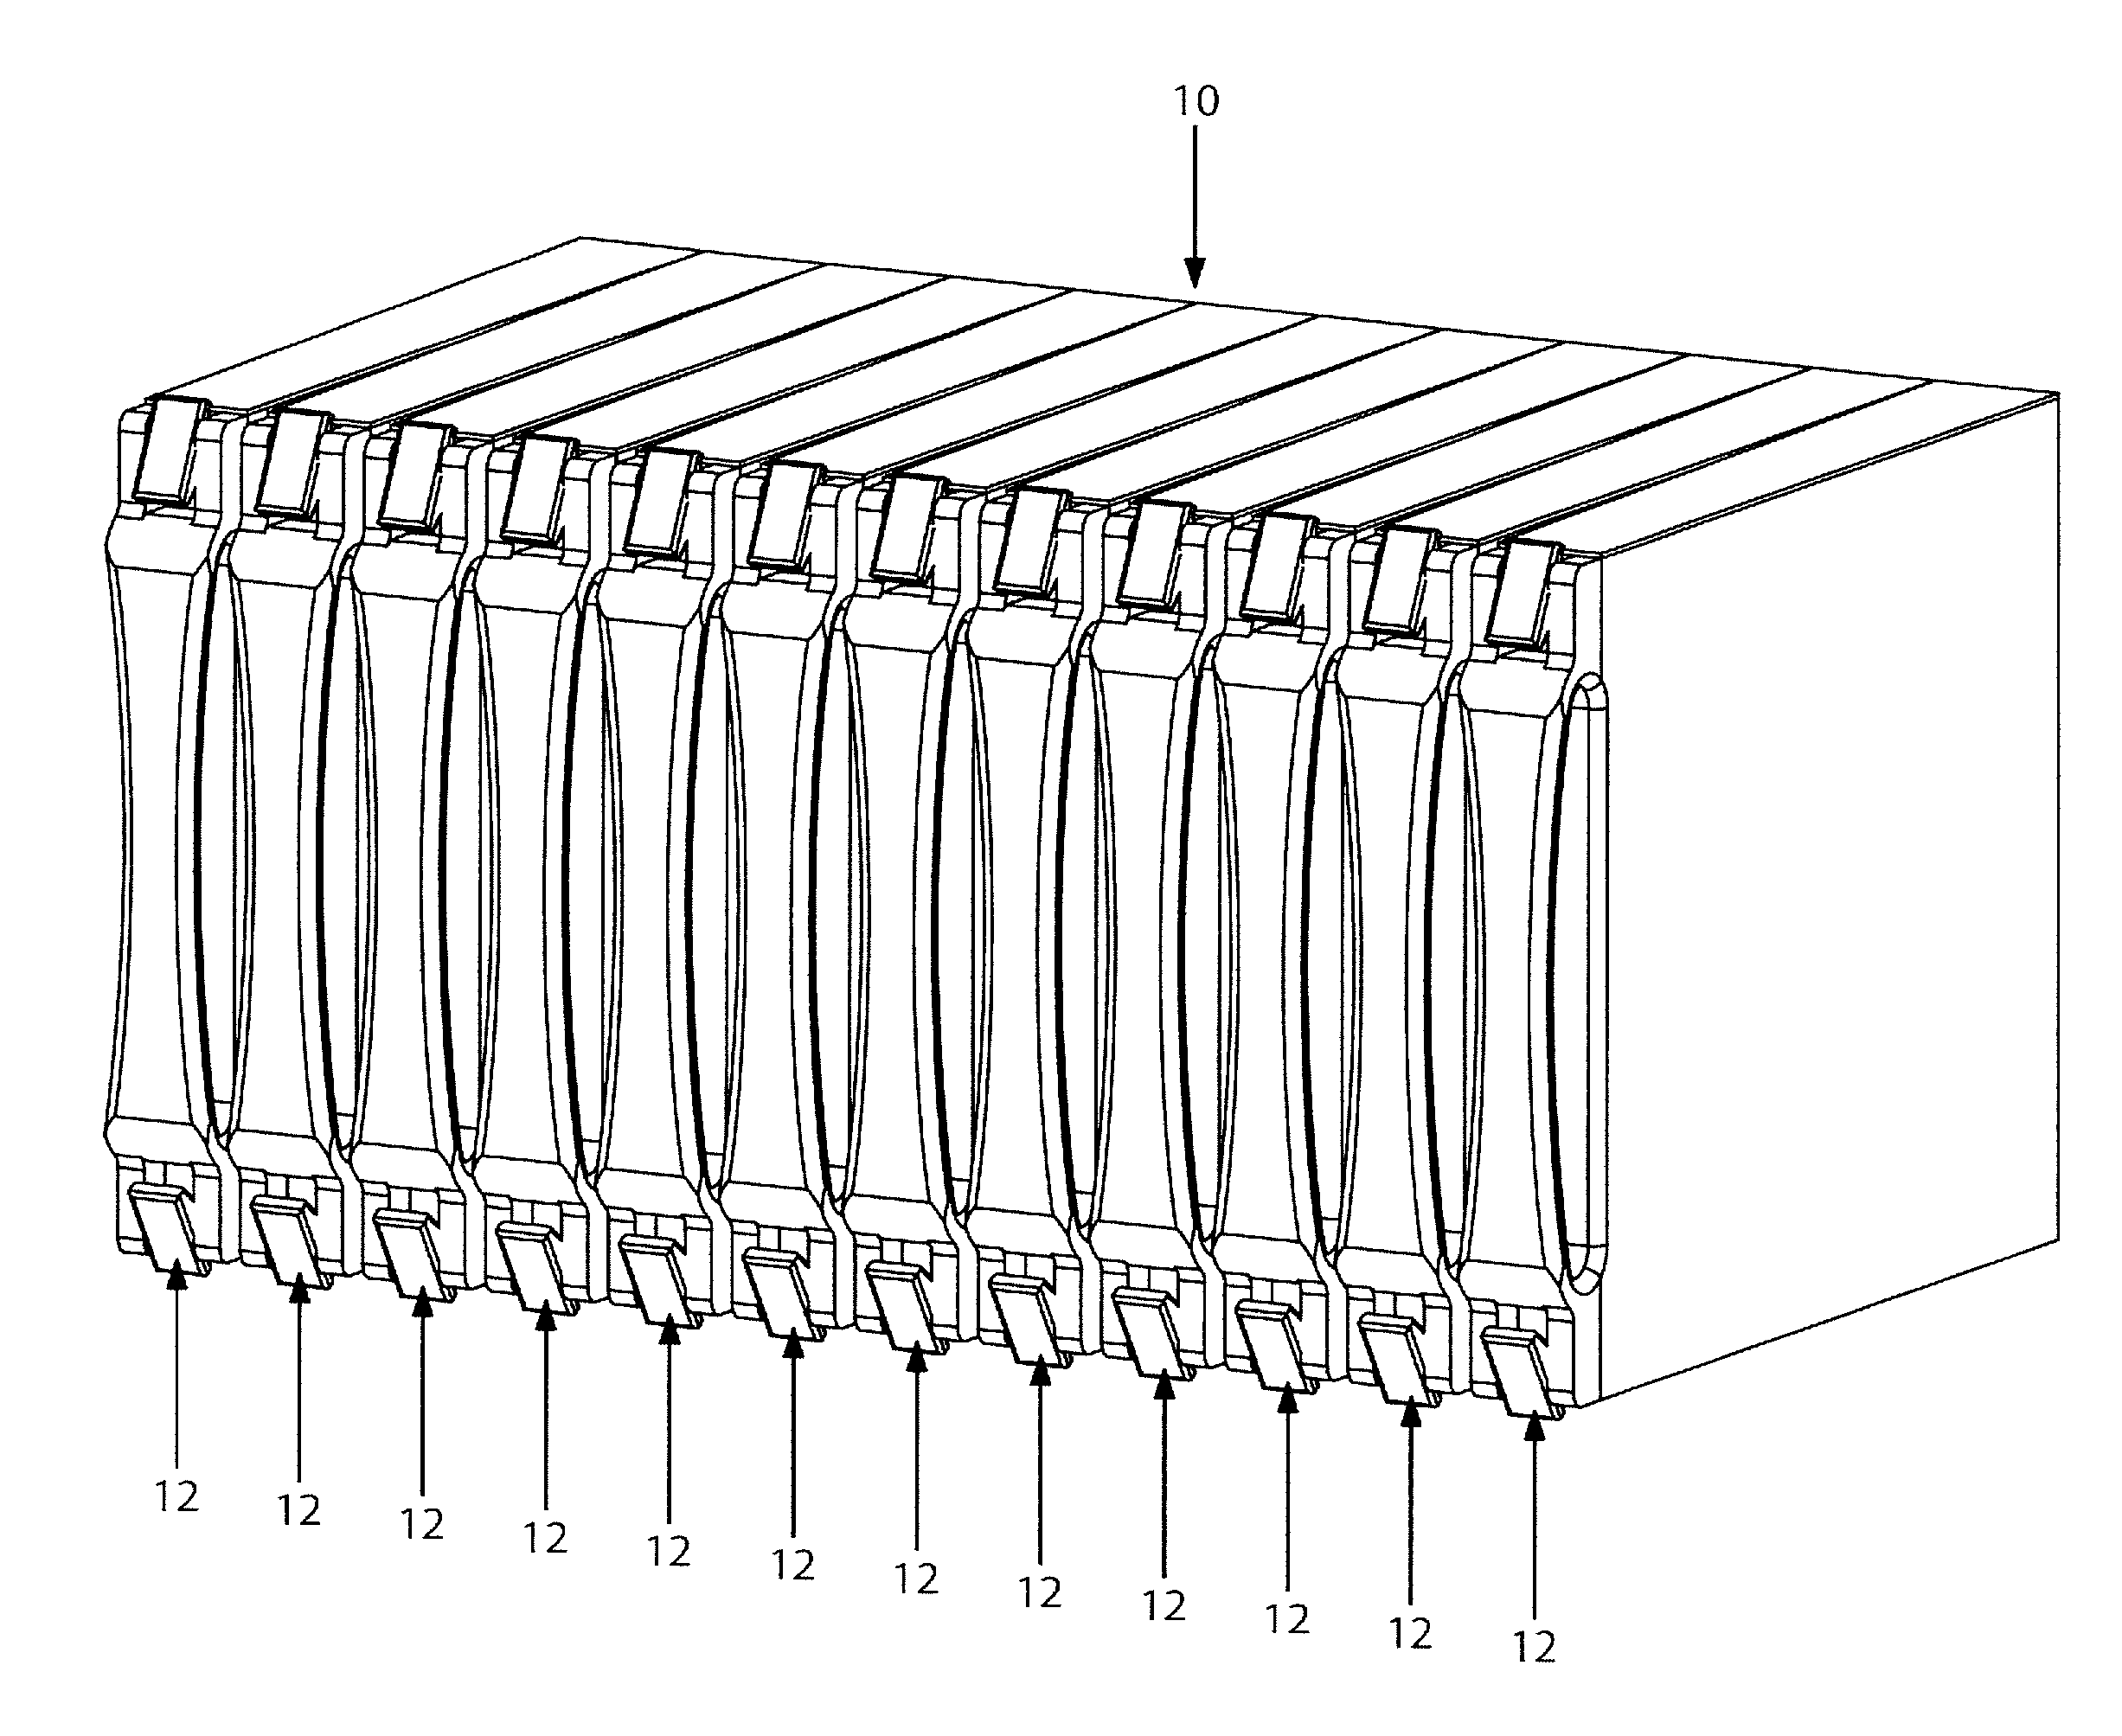 Case and rack system for liquid submersion cooling of electronic devices connected in an array